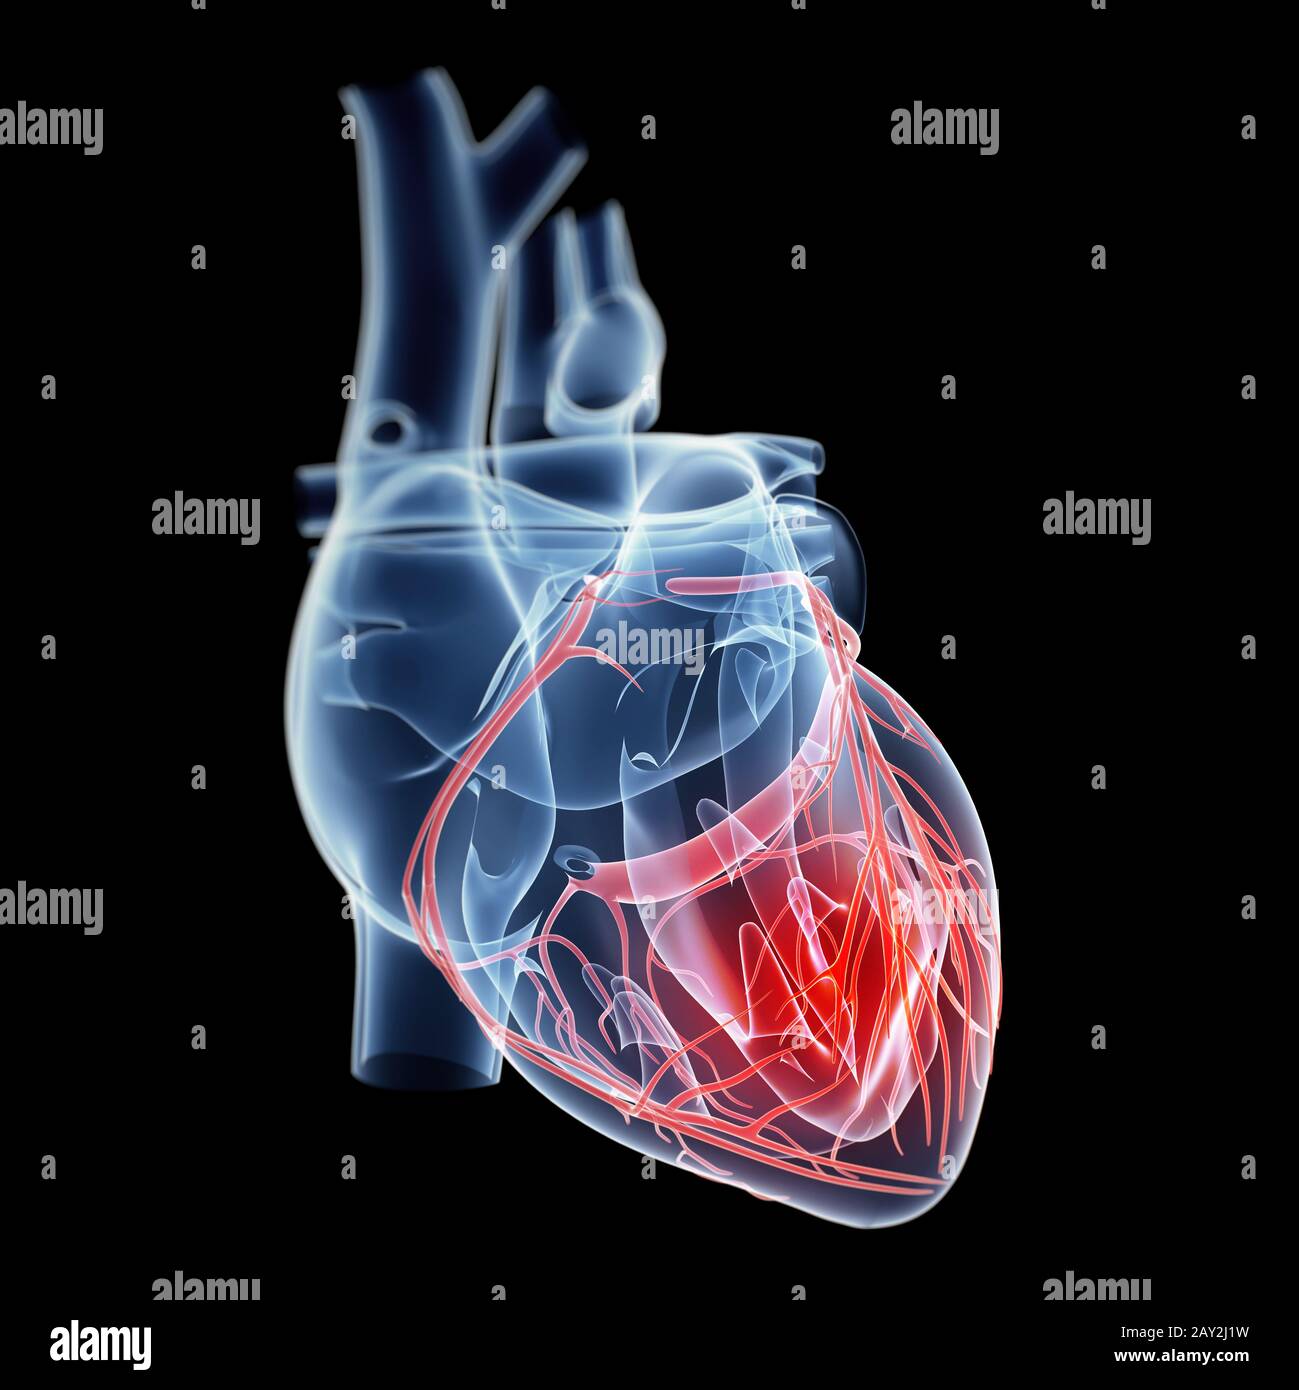 illustration showing pain in the heart Stock Photo